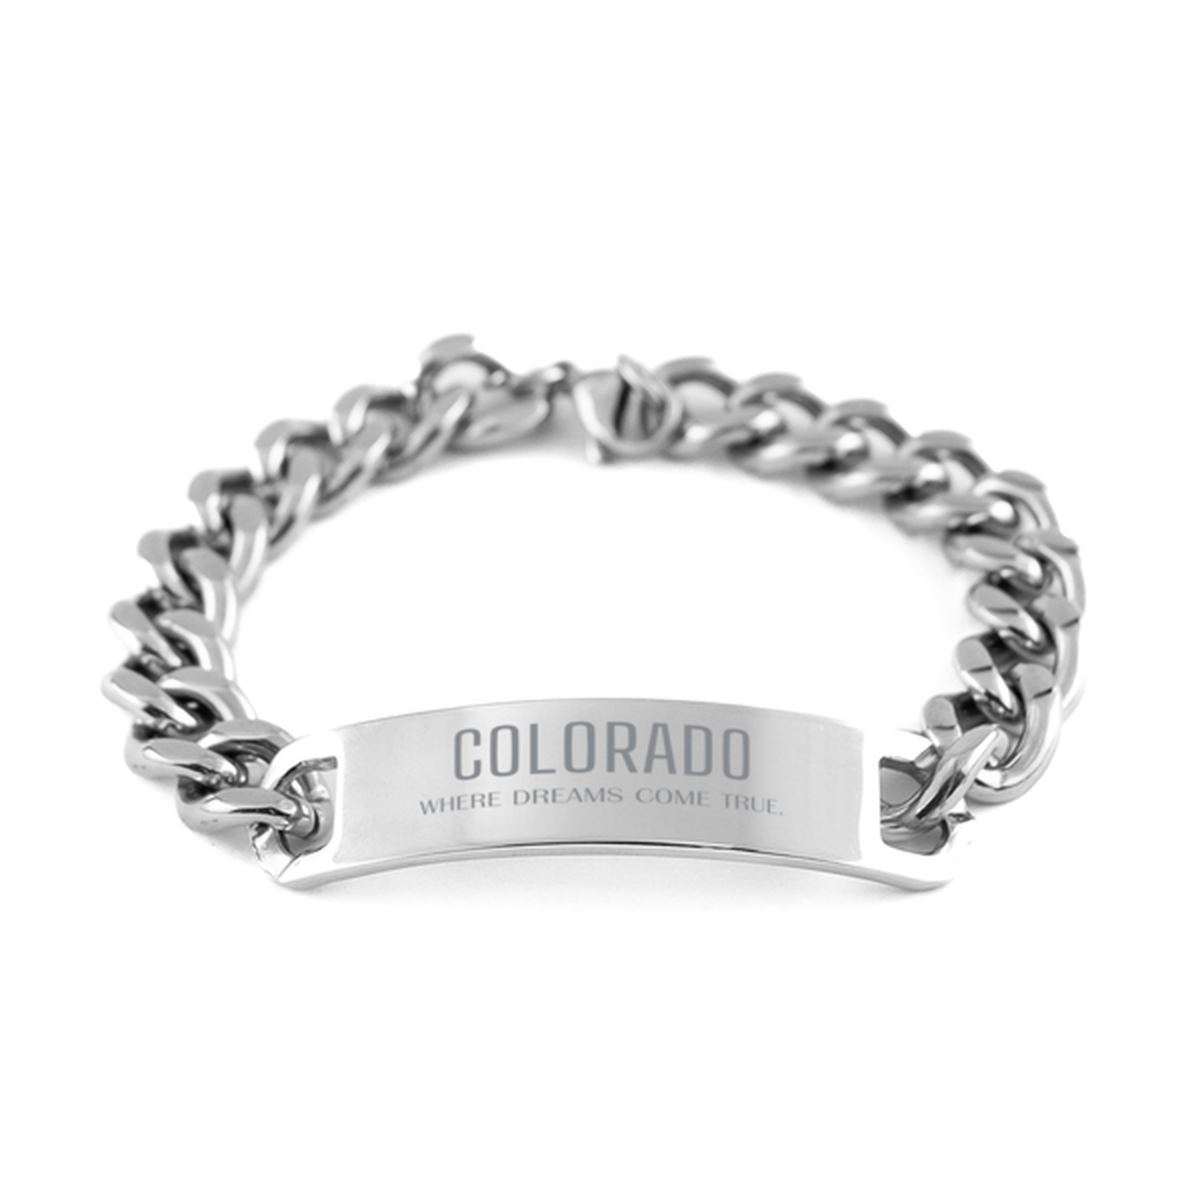 Love Colorado State Cuban Chain Stainless Steel Bracelet, Colorado Where dreams come true, Birthday Inspirational Gifts For Colorado Men, Women, Friends